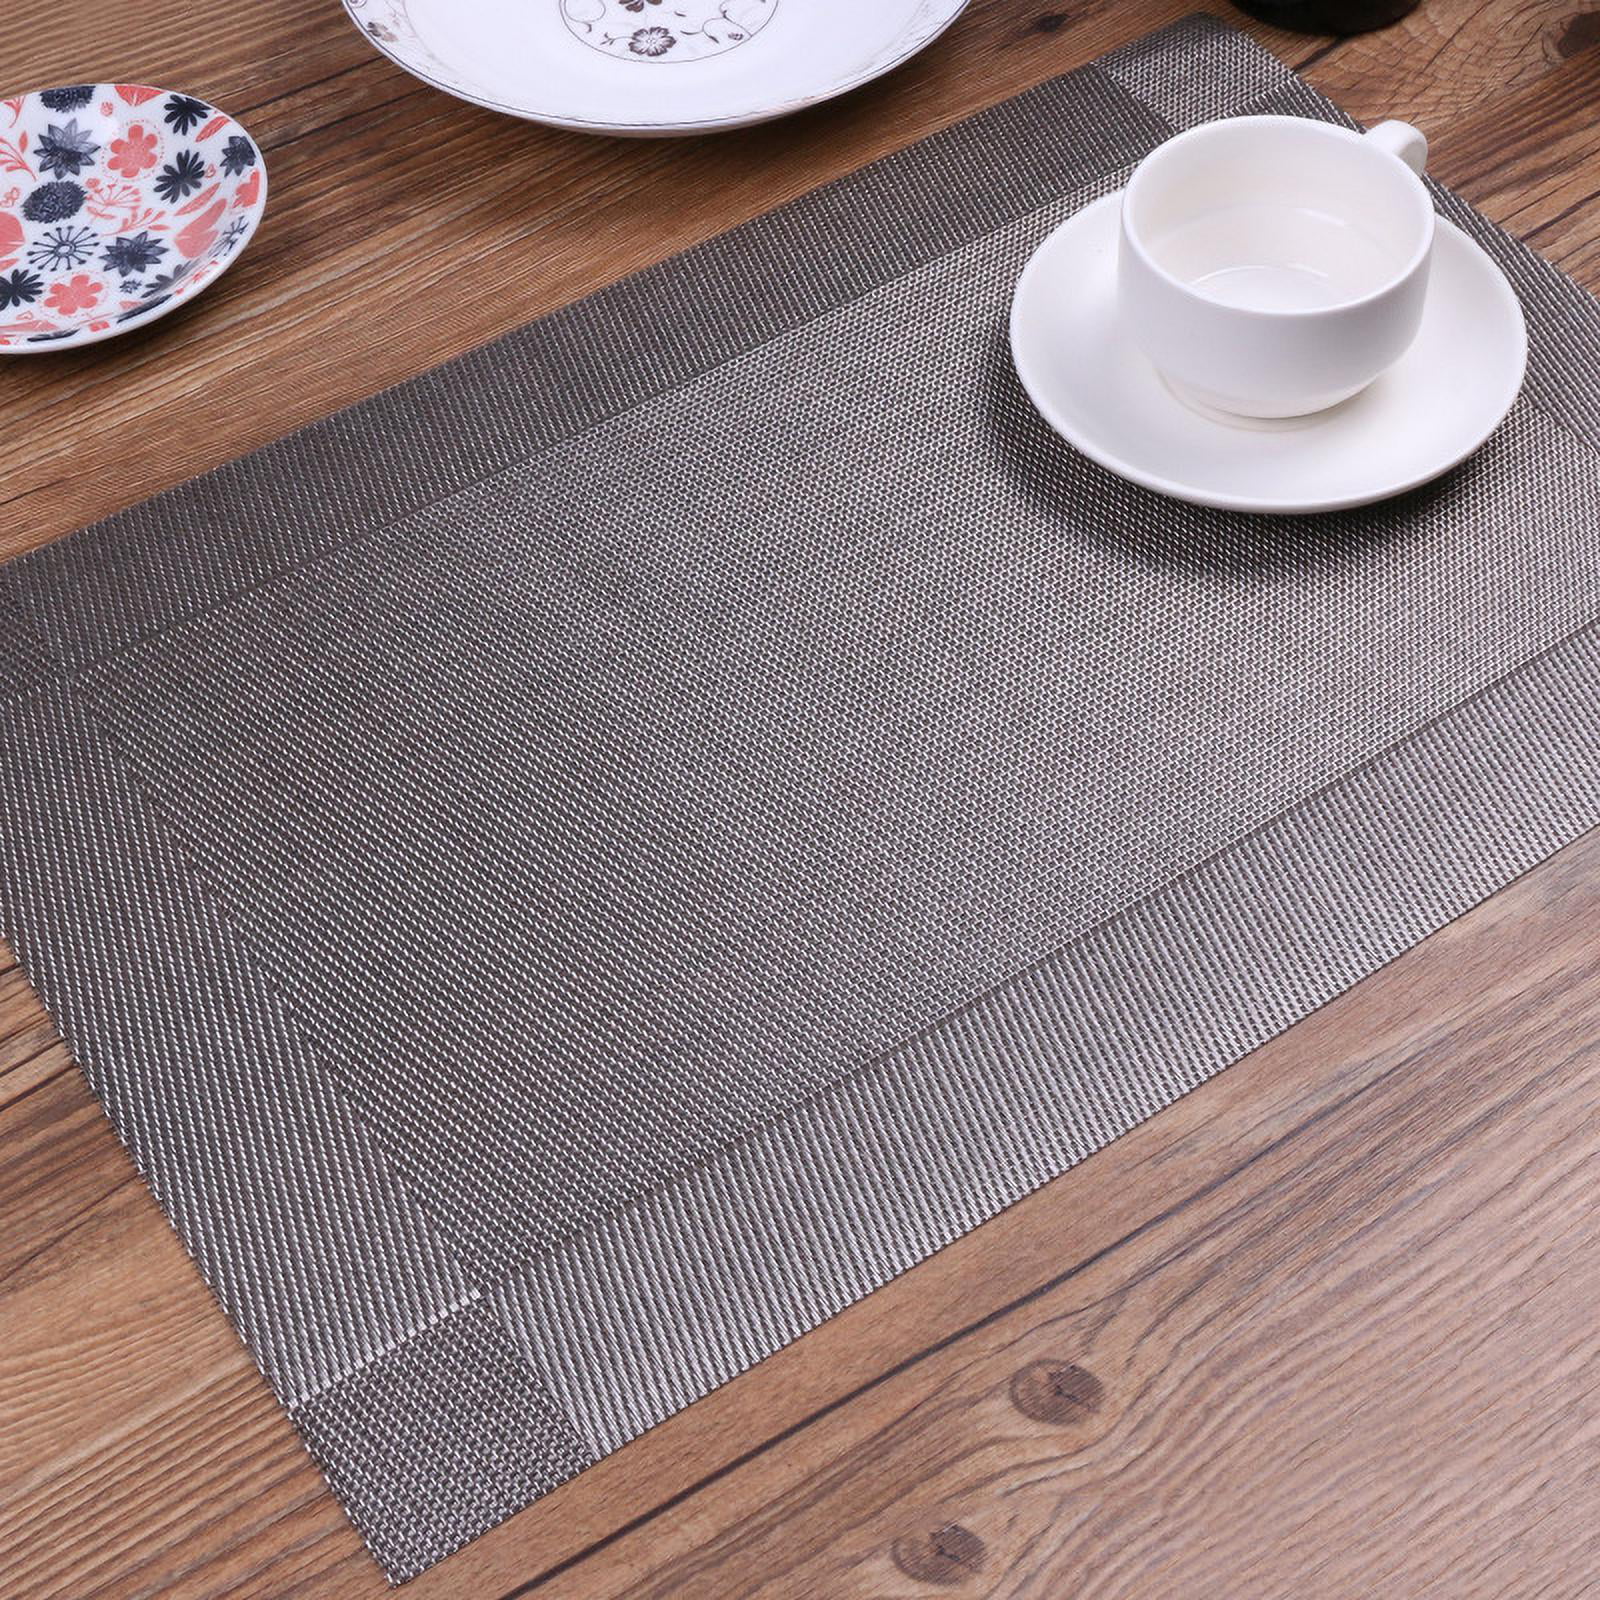 Details about   Dining Table Mats Of 6 Pack Stitched Placemats Easy Care Washable 18x12" 